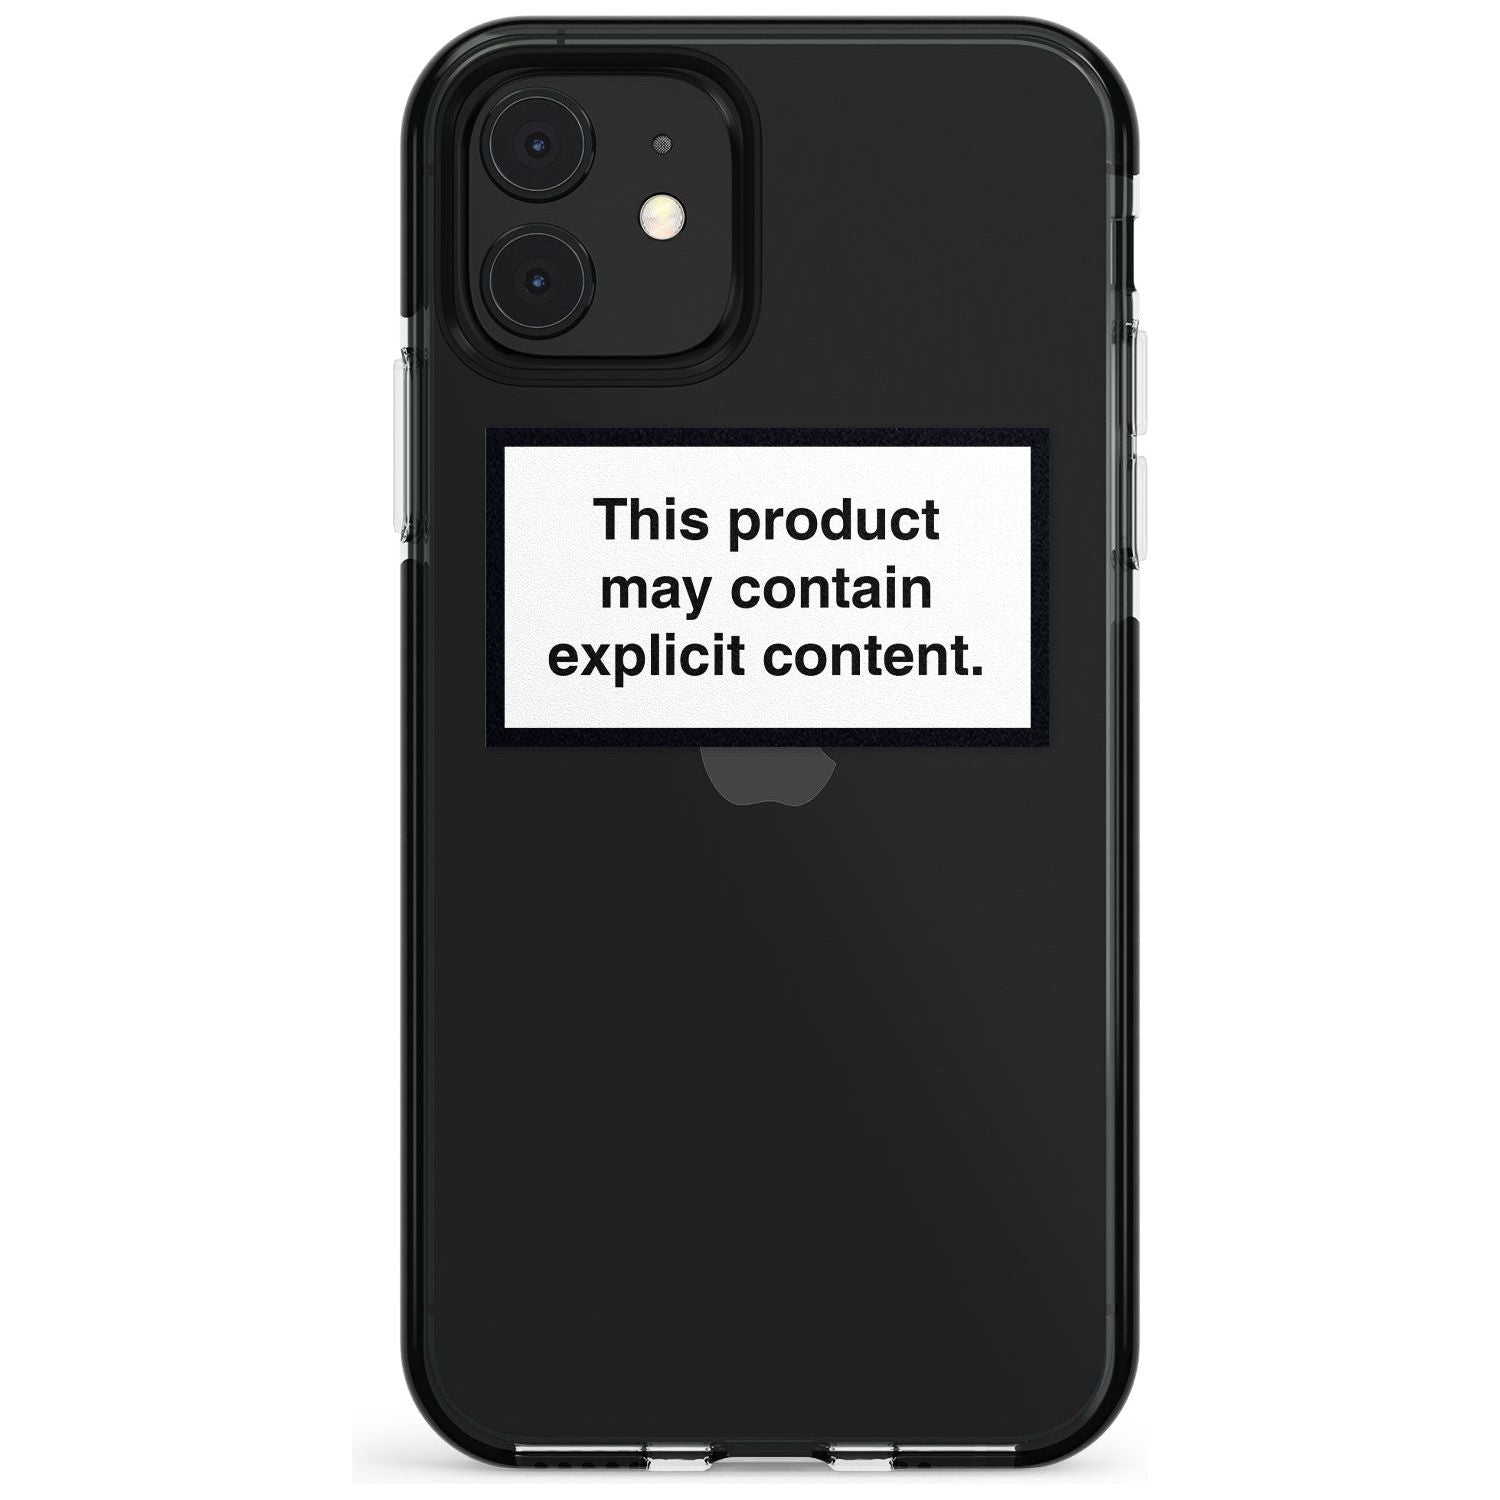 This product may contain explicit content Pink Fade Impact Phone Case for iPhone 11 Pro Max